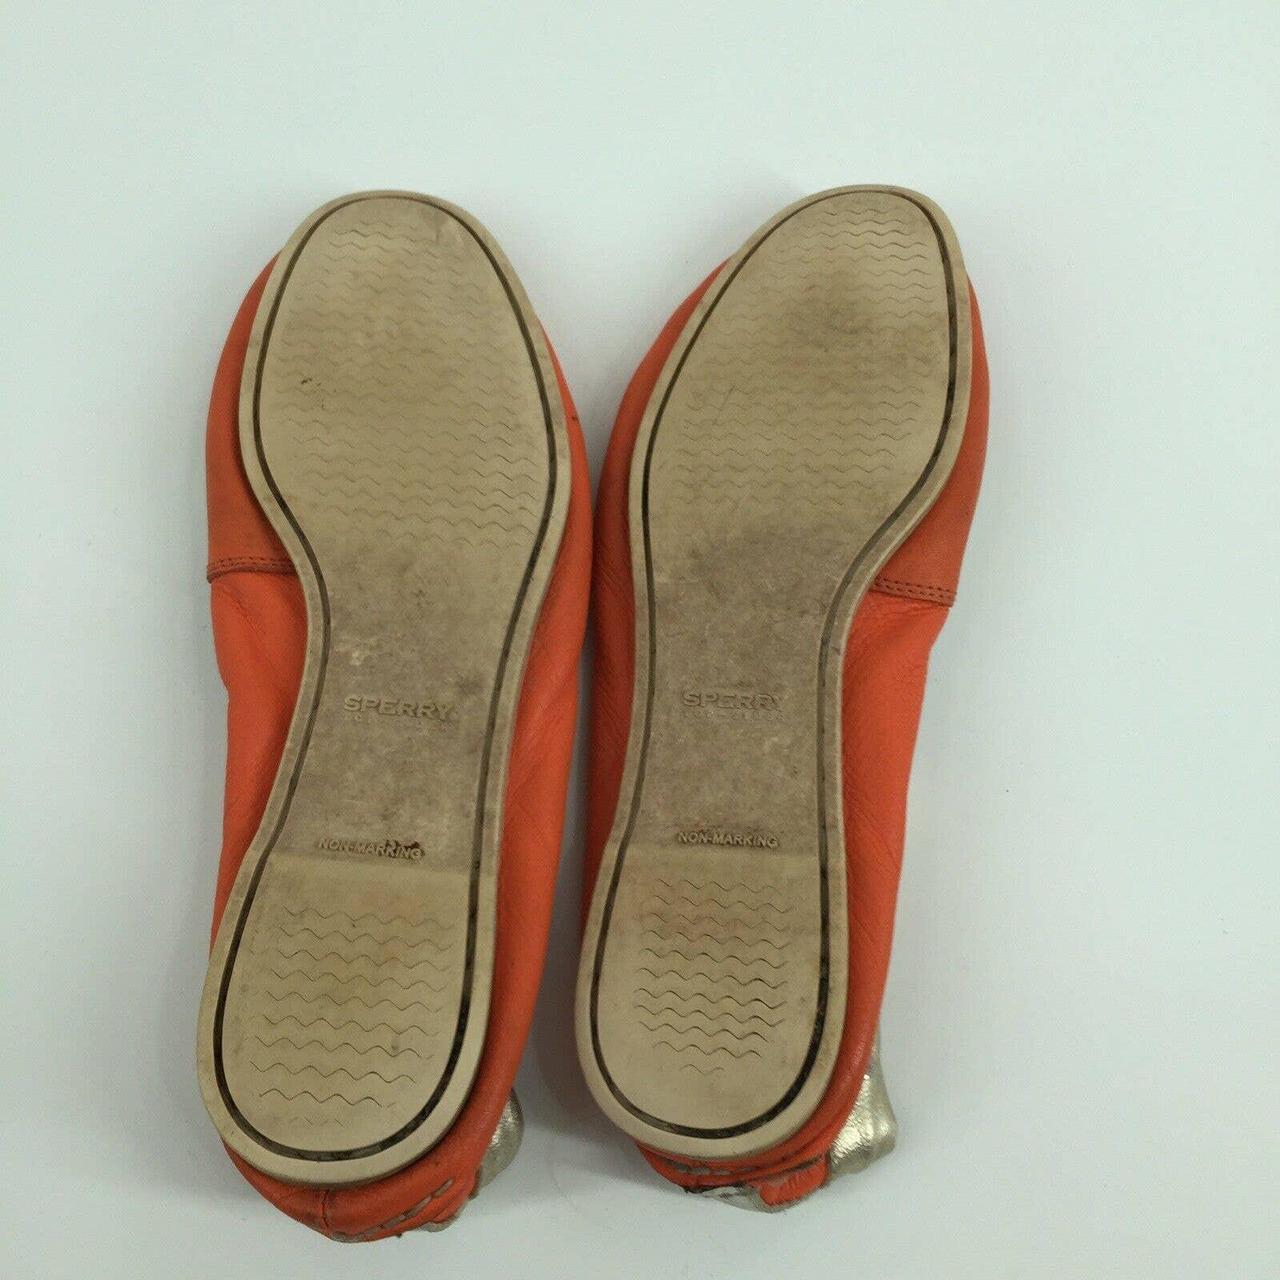 Sperry Women's Orange and White Loafers (4)